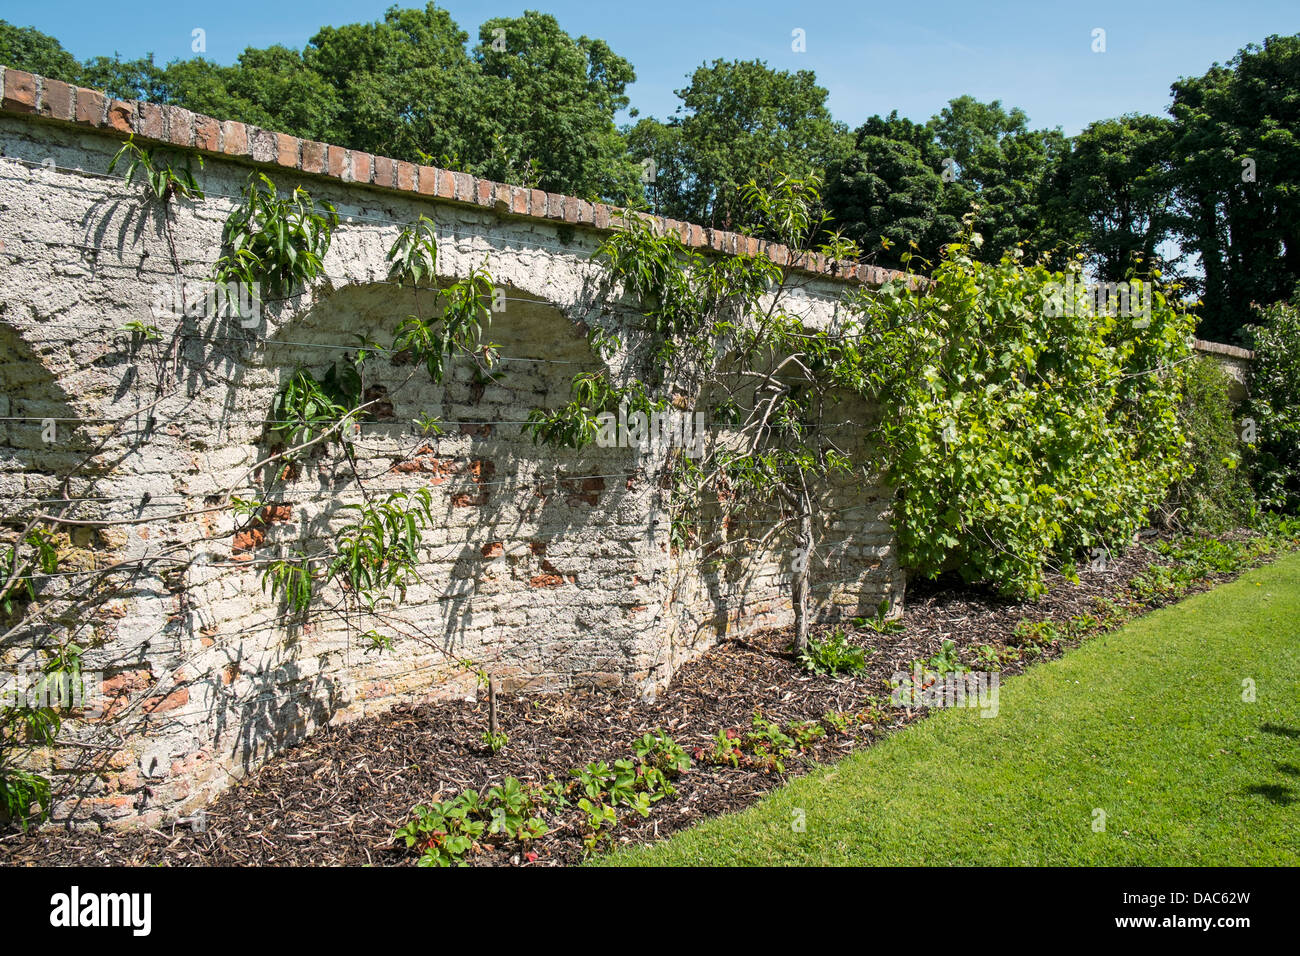 Bays for heat conservation for fruit trees on a wall of a Victorian kitchen garden Stock Photo